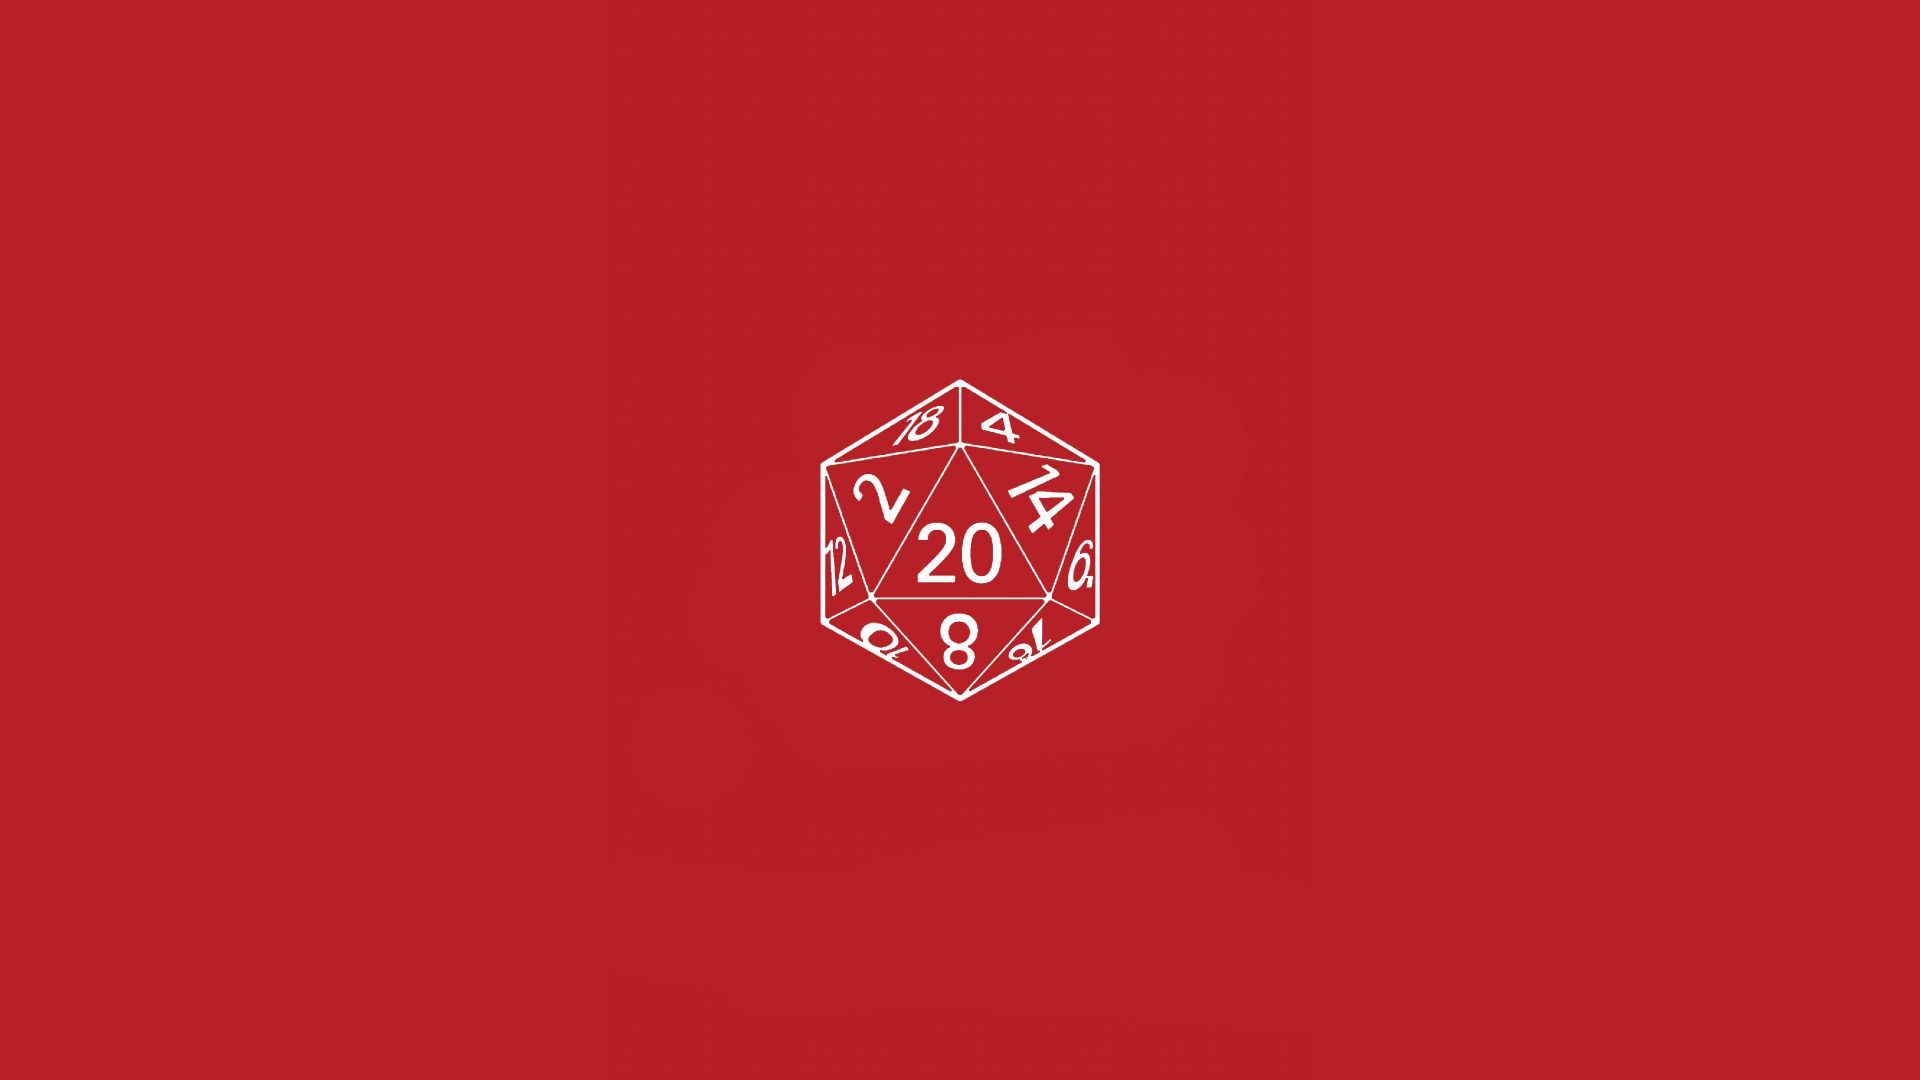 D20 Computer Wallpaper. Computer wallpaper, Wallpaper, Dungeons